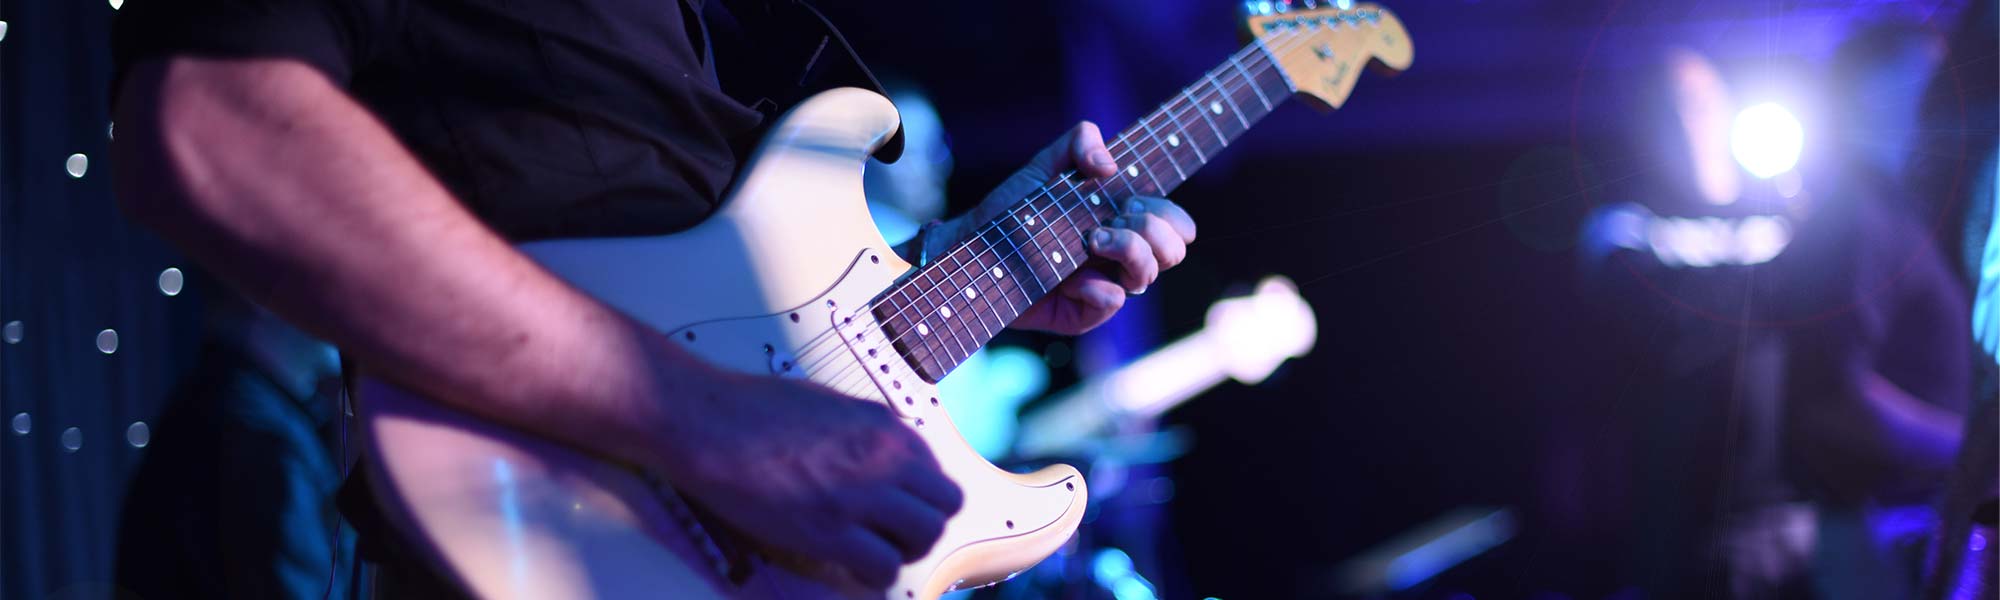 Close up of Stu Mackinnon's Fender Stratocaster during a Discography wedding performance